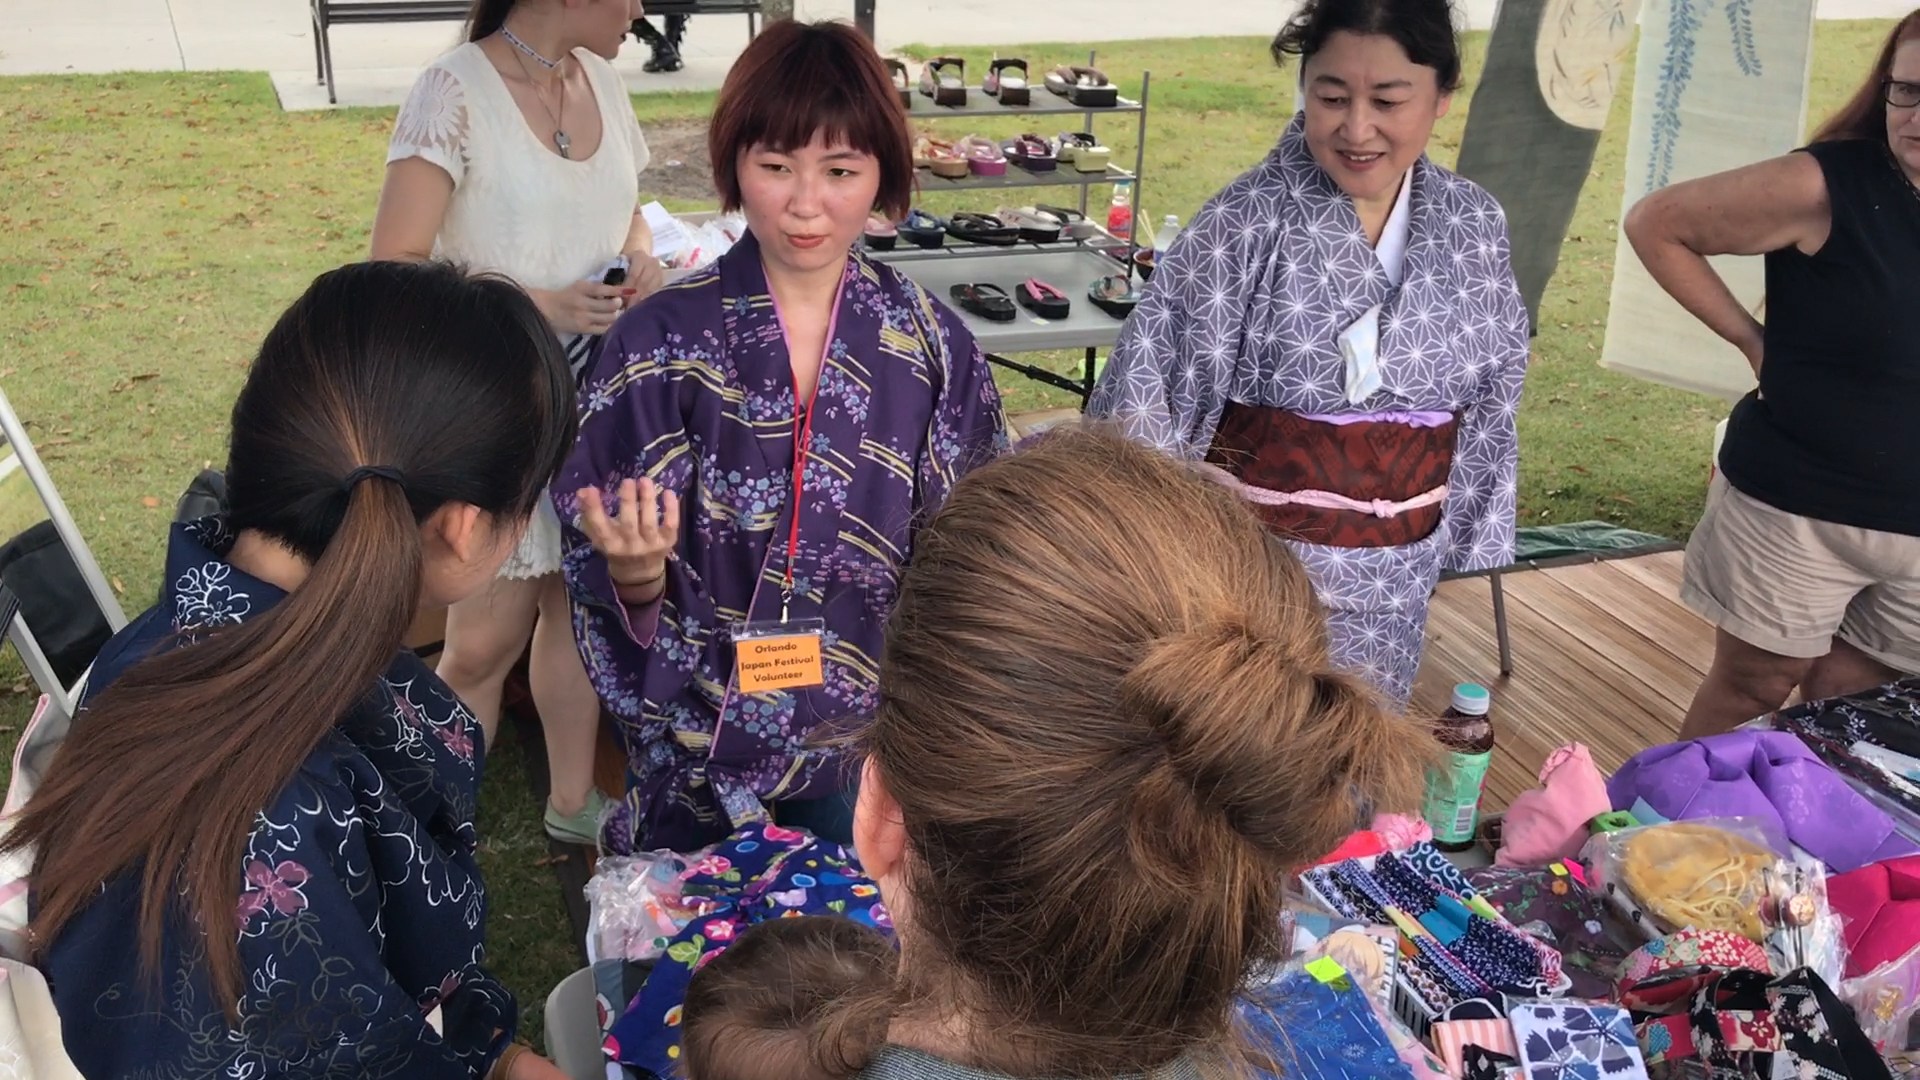 Yayoi Kimono and Accessories - JAO Orlando Japan Festival Review YouTube Video 2017 Lots of Fun Every Year